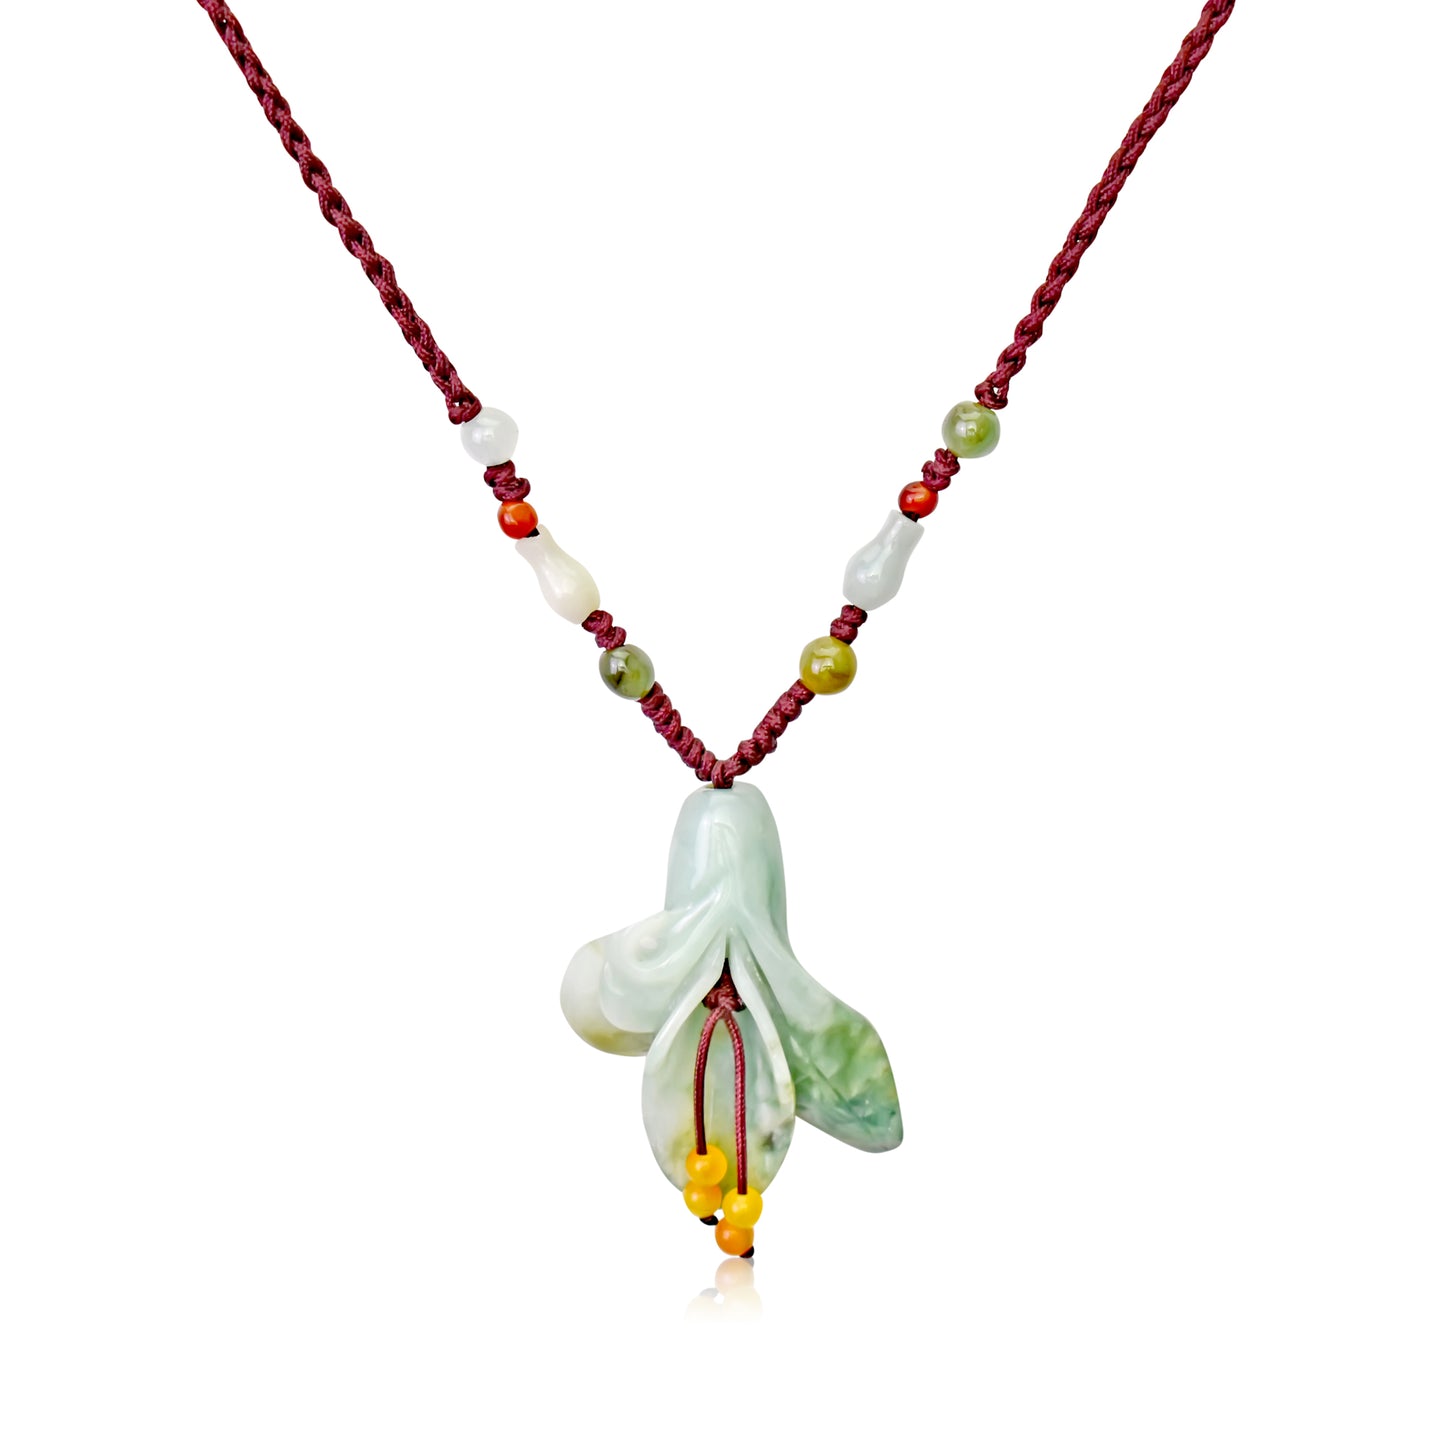 Add Beauty and Charm with the Calla Lily Necklace made with Brown Cord